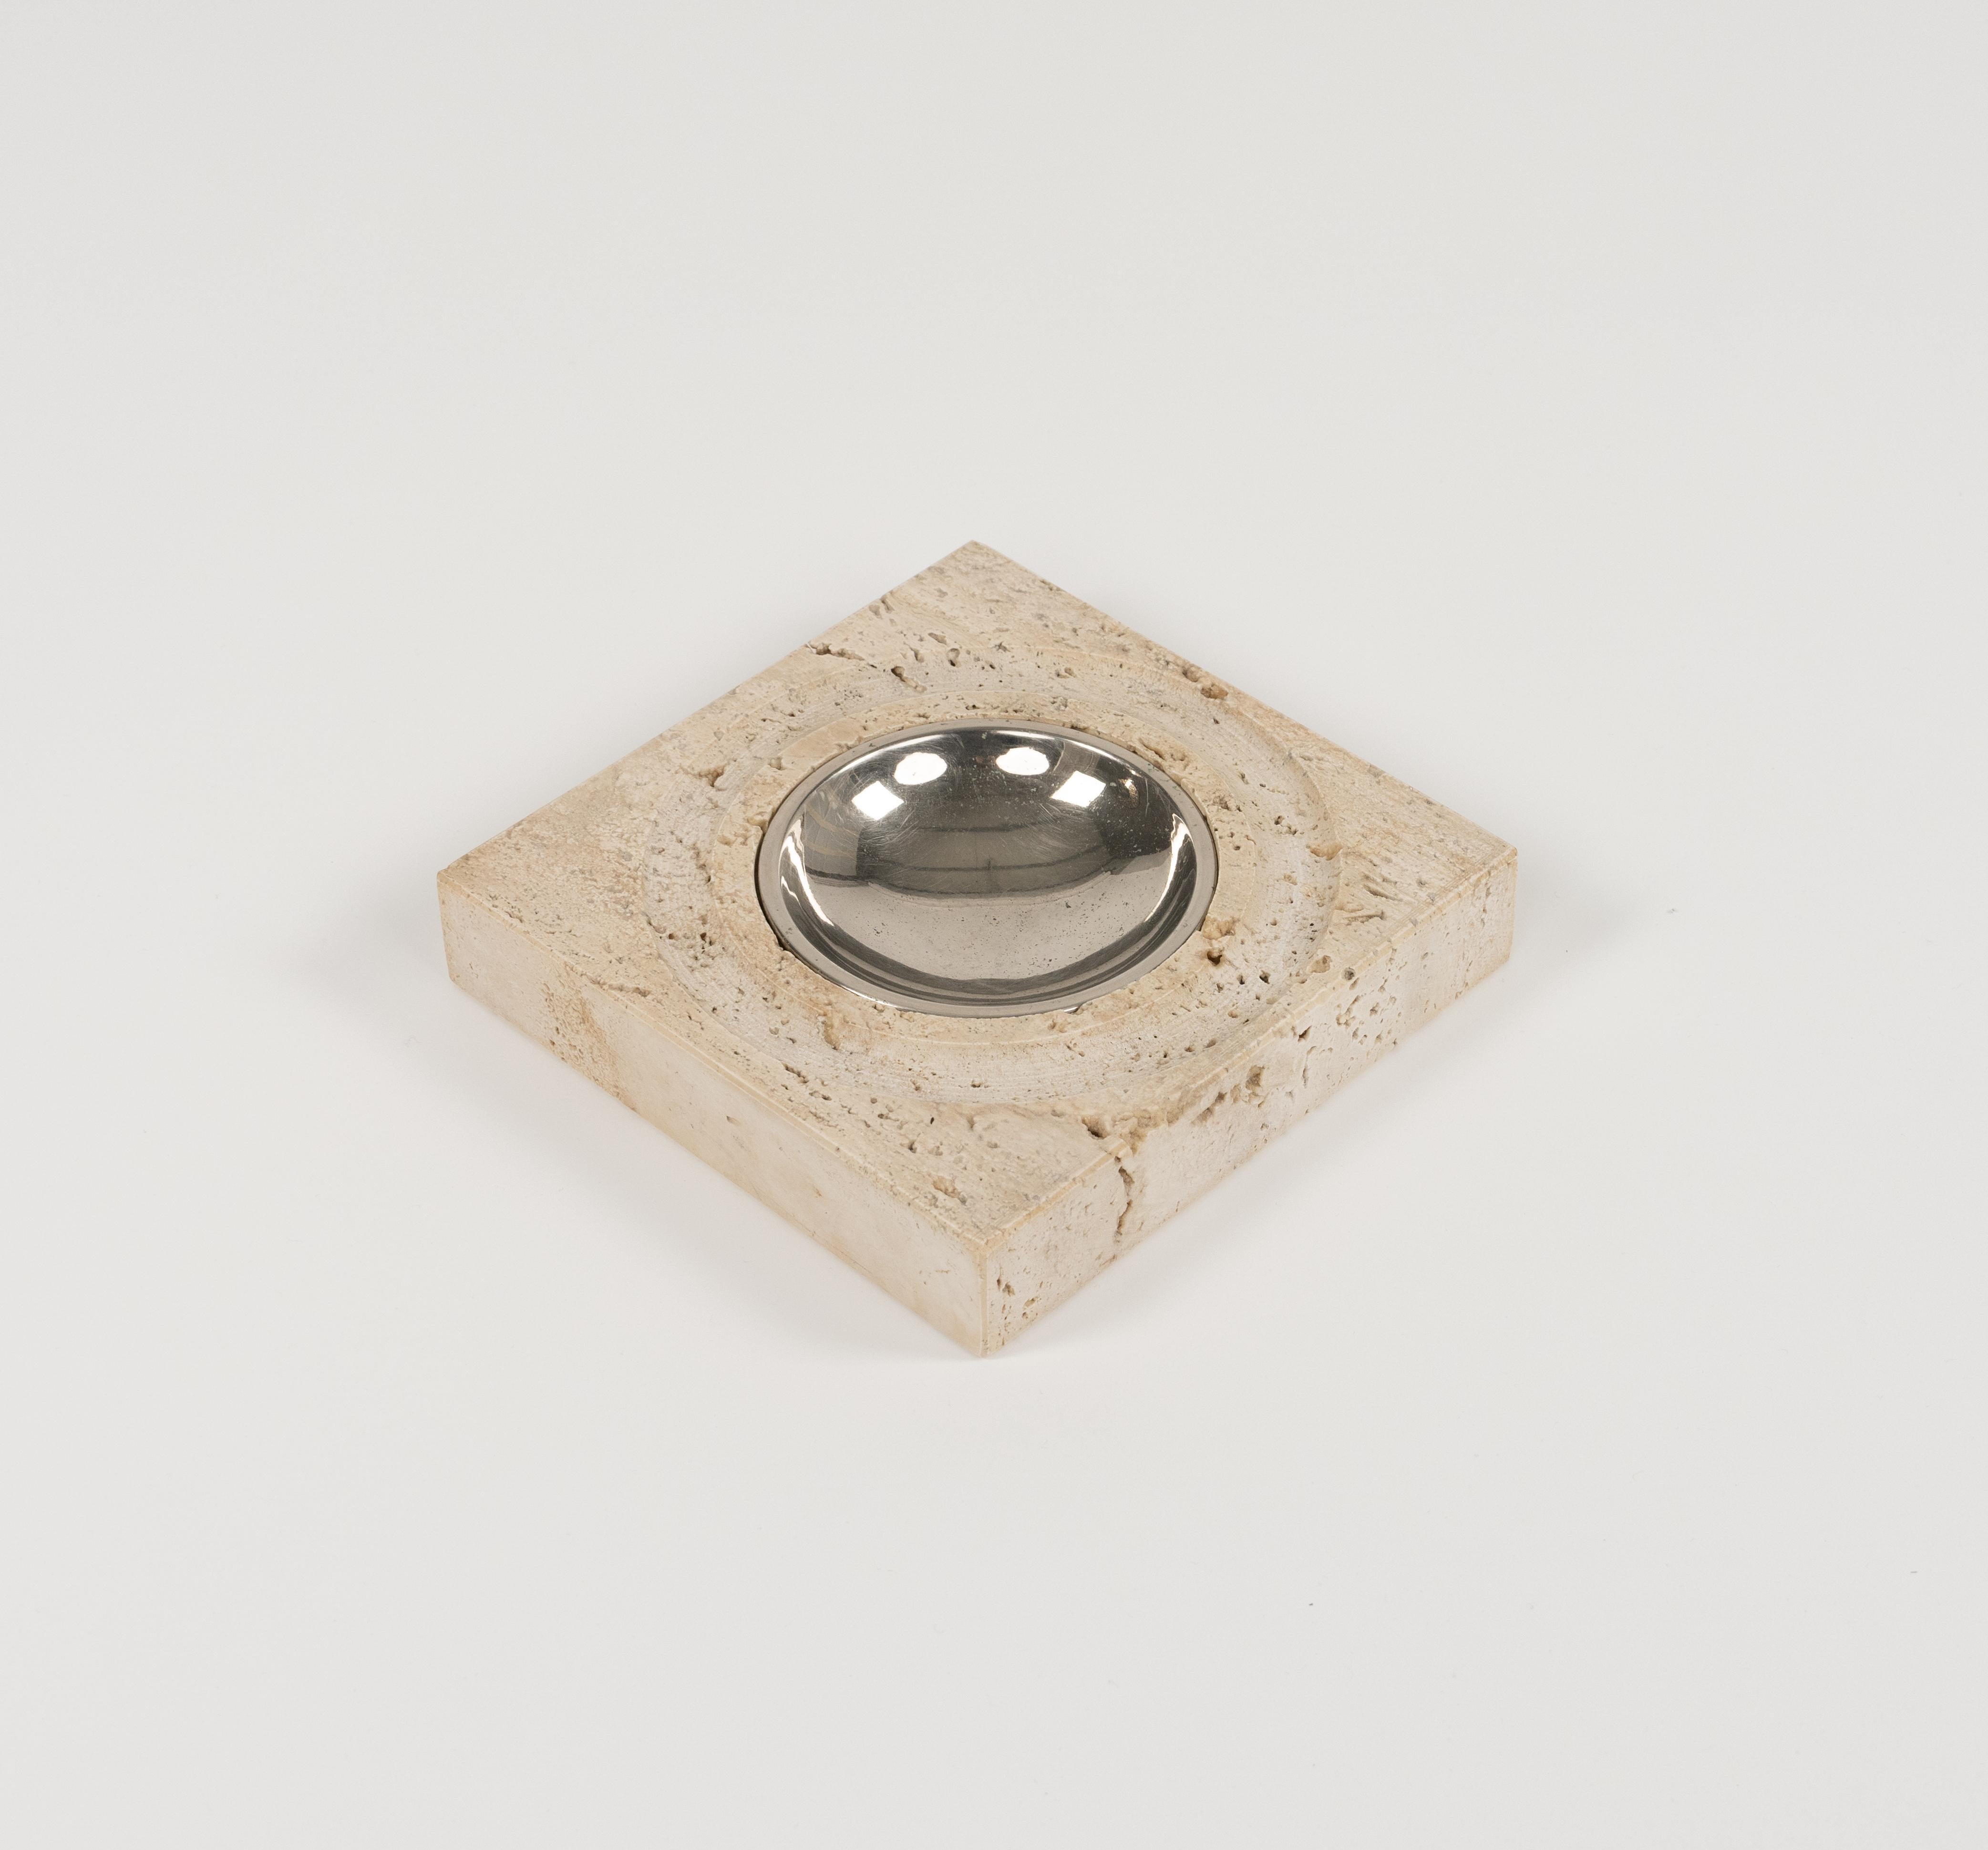 Midcentury amazing squared ashtray or vide-poche in travertine and steel by Fratelli Mannelli.

Made in Italy in the 1970s.

Perfect desk object or gift idea.